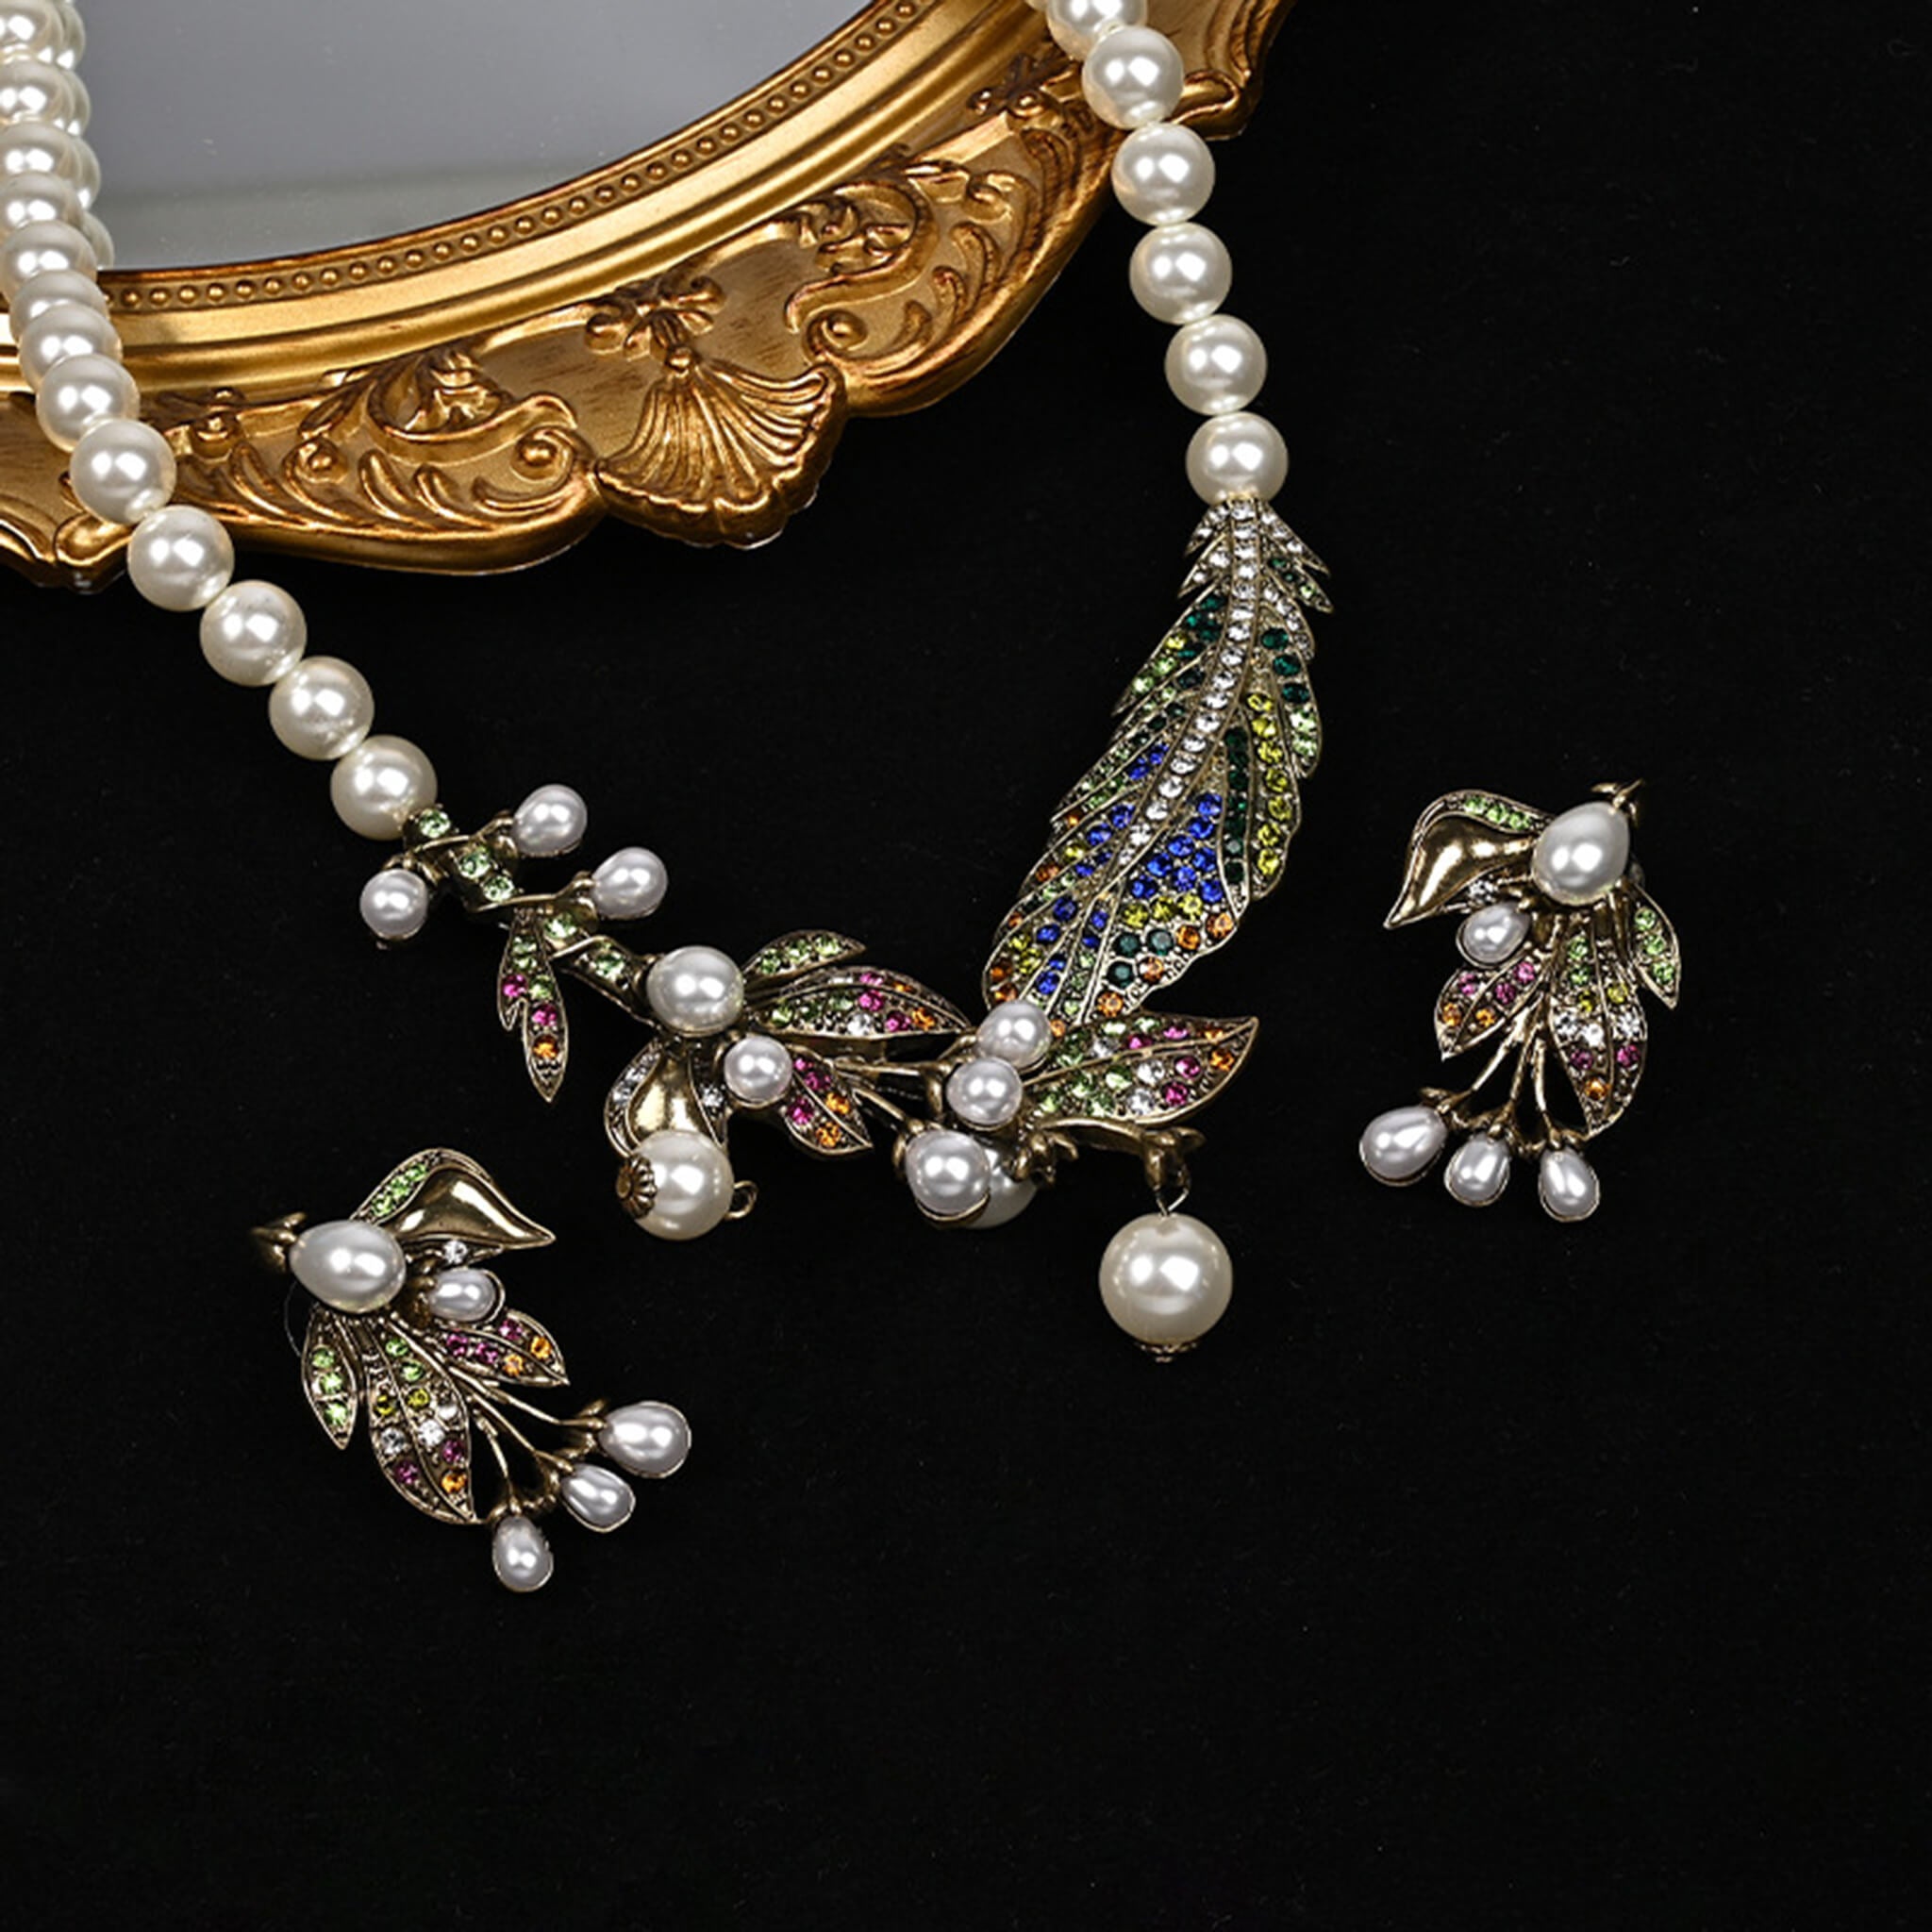 Vintage and Majestic Glass Bead Necklace and Leaf Earrings Set  UponBasics   